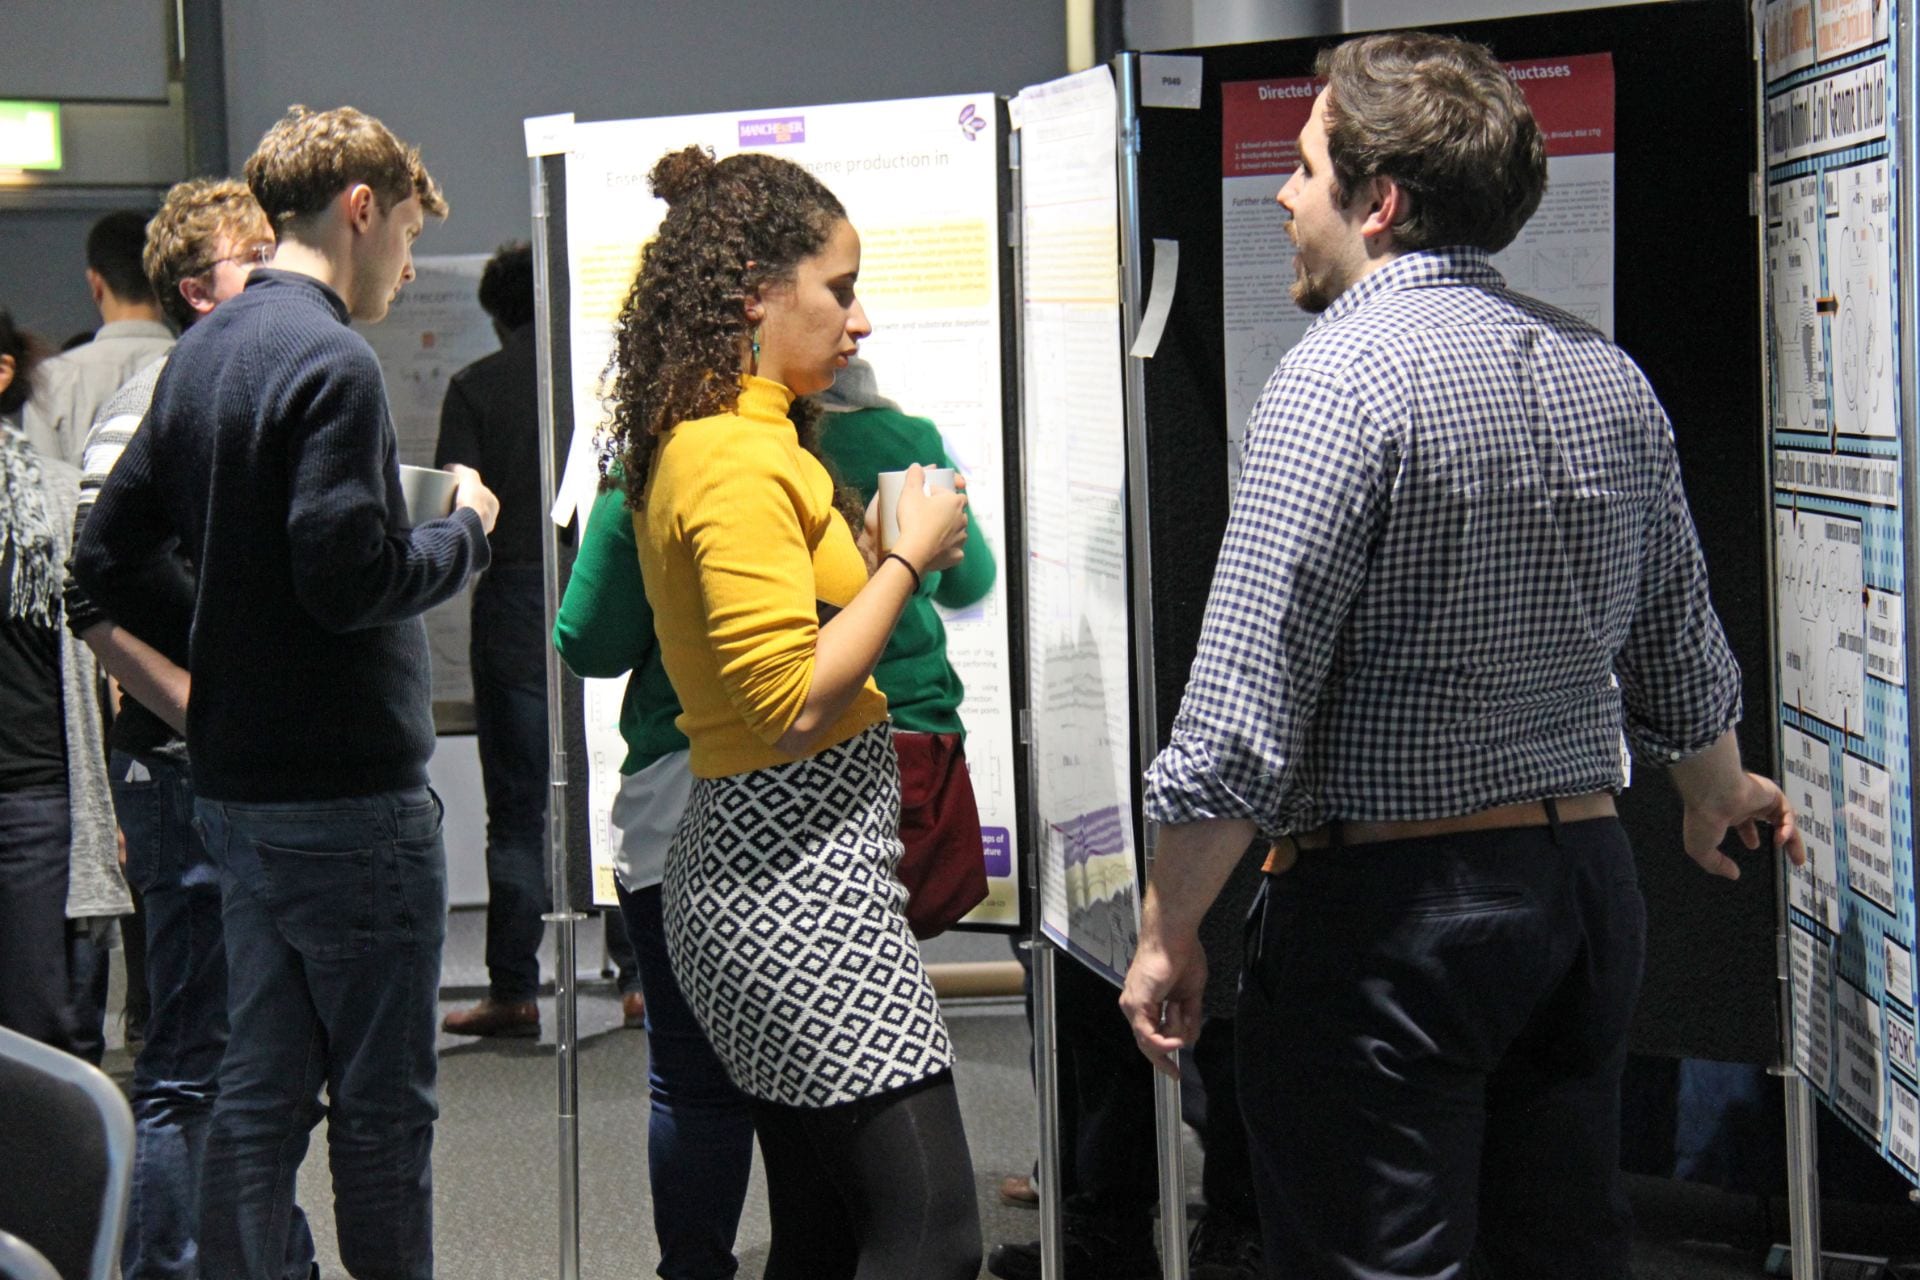 Poster sessions provided networking opportunities at SBUK 2018